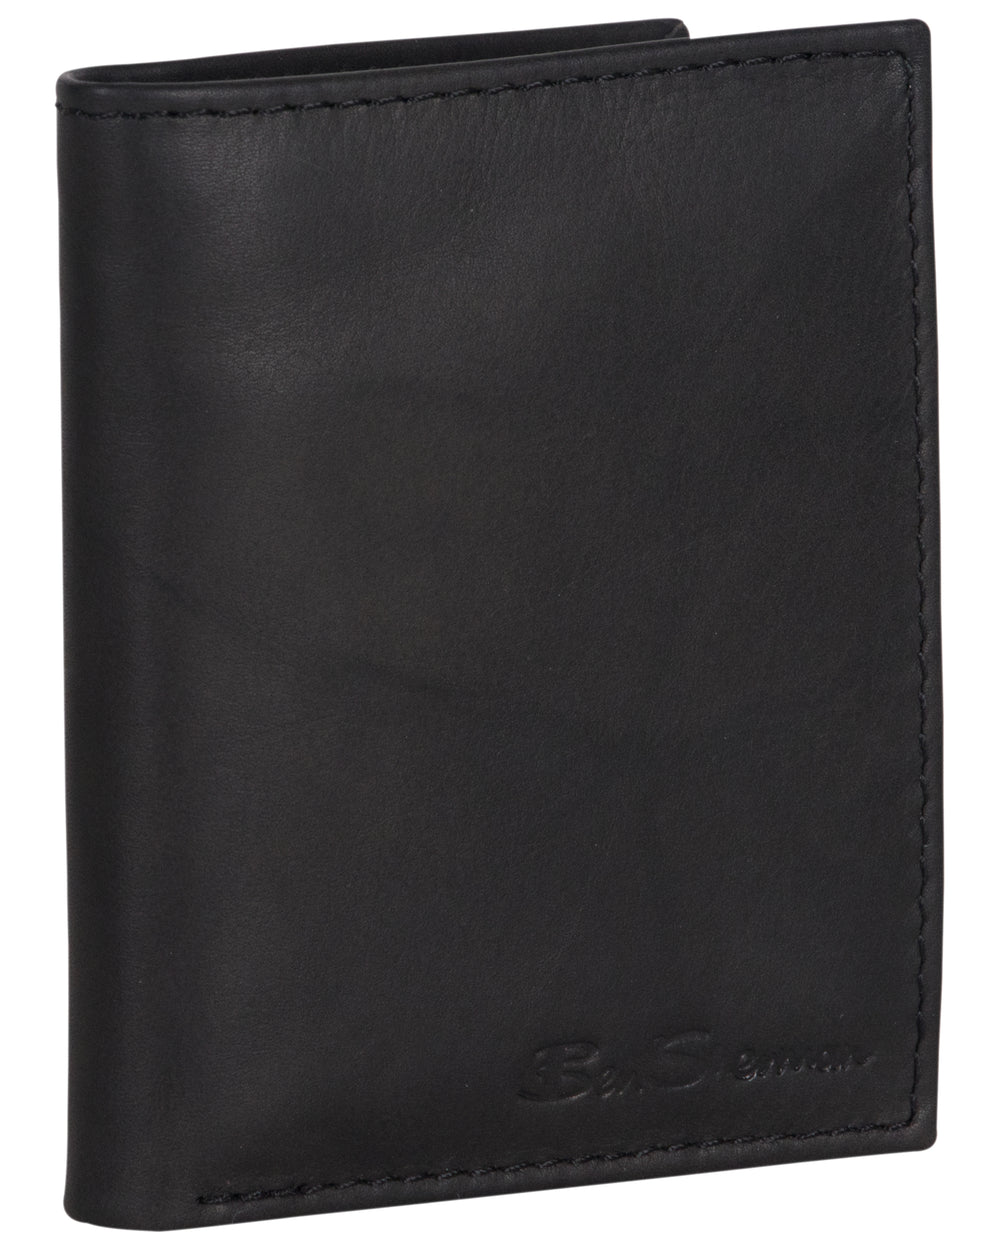 Manchester Marble Crunch Leather Bifold Wallet with Pull Tab - Black